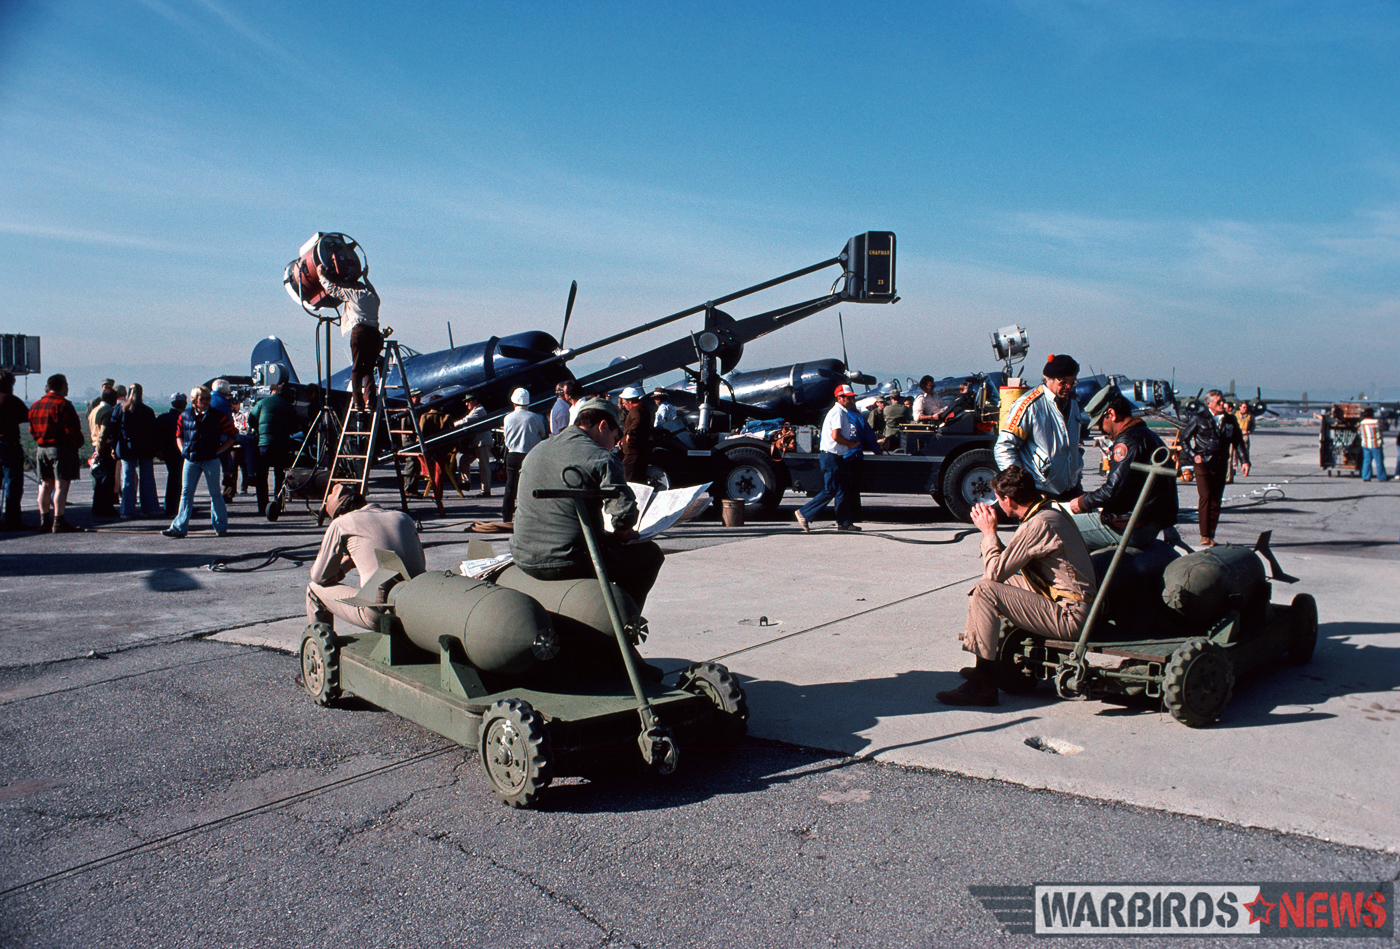 Filming the Corsairs. (photo by Frank Mormillo via Stephen Chapis)